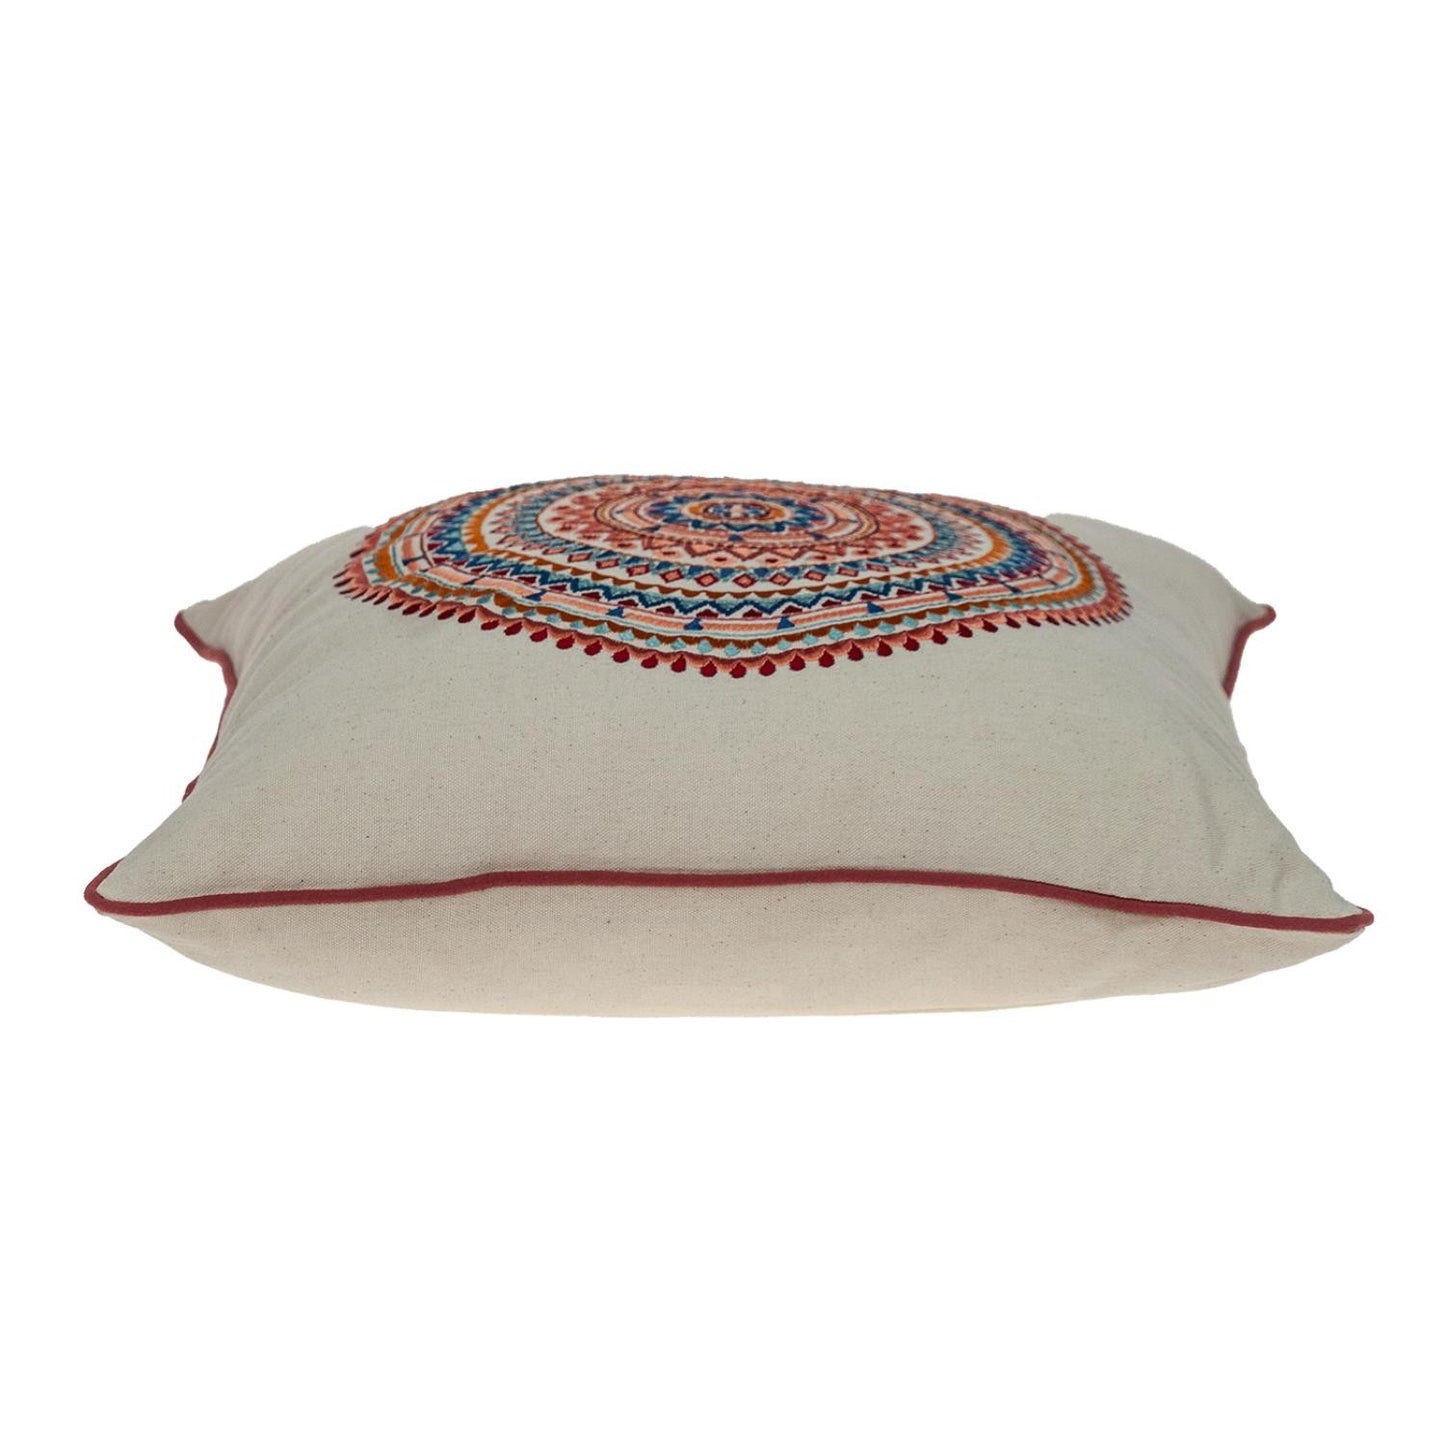 Mandala Embroidered Multicolor Throw Pillow